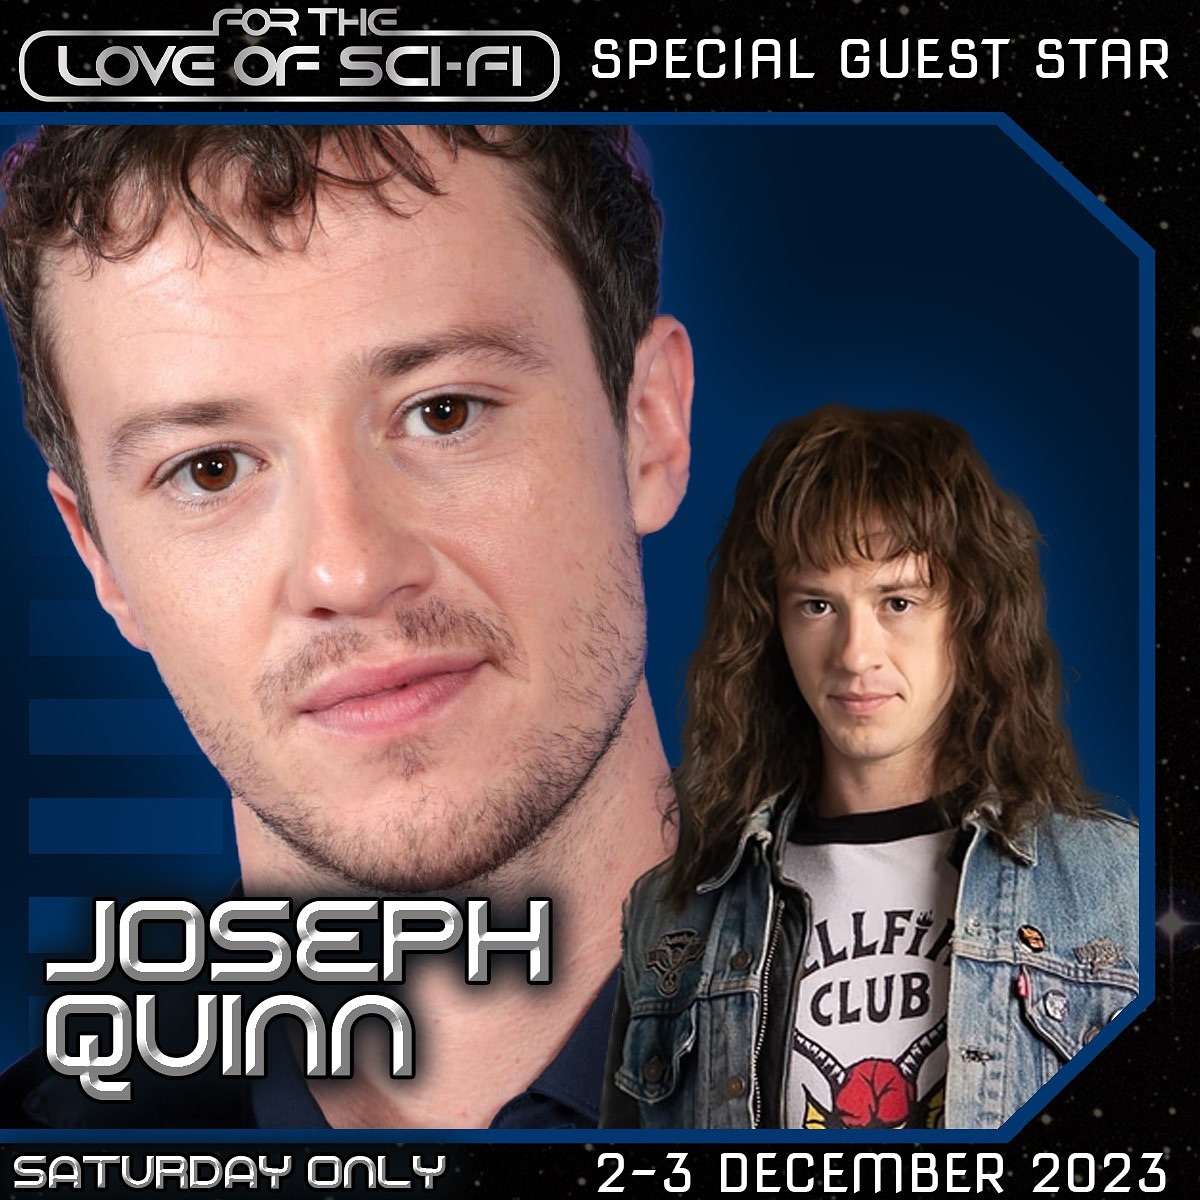 Stranger Things actor Joseph Quinn coming to FAN EXPO Dallas 2023